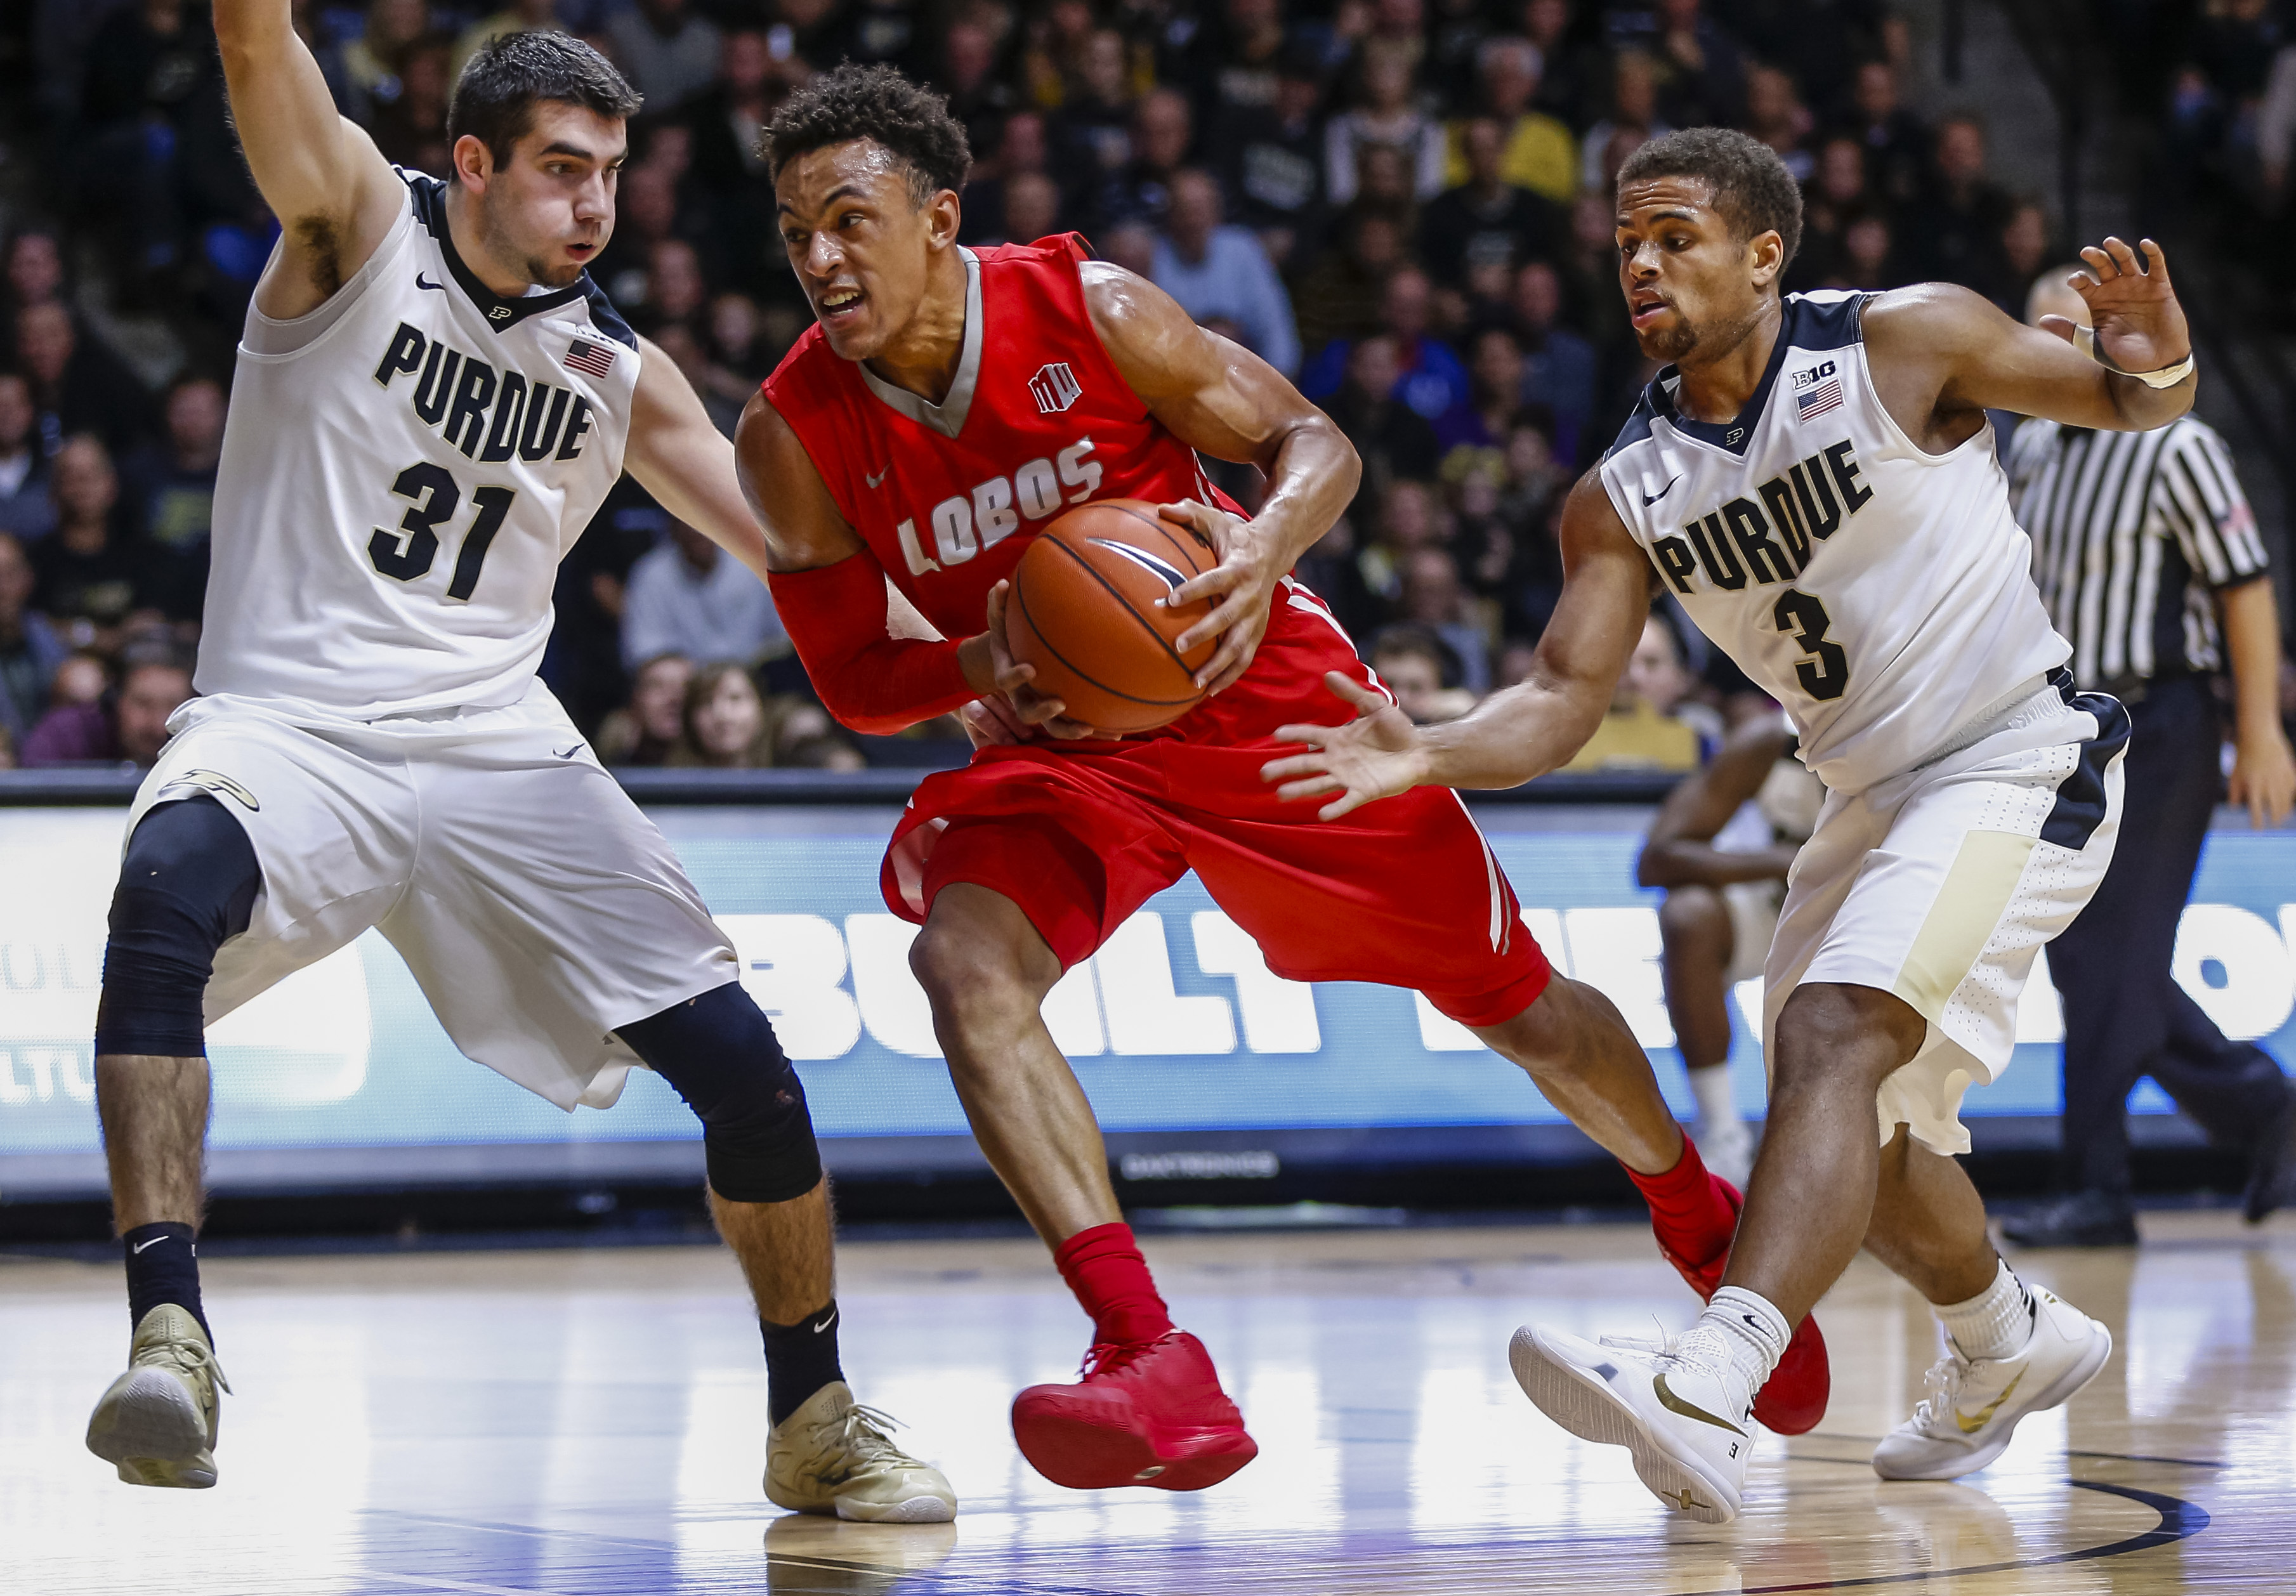 WEST LAFAYETTE, IN - DECEMBER 5: Elijah Brown #4 of the New Mexico Lobos dribbles to the hoop as Dakota Mathias #31 and P.J. Thompson #3 of the Purdue Boilermakers defend at Mackey Arena on December 5, 2015 in West Lafayette, Indiana. Purdue defeated New Mexico 70-58. (Photo by Michael Hickey/Getty Images)